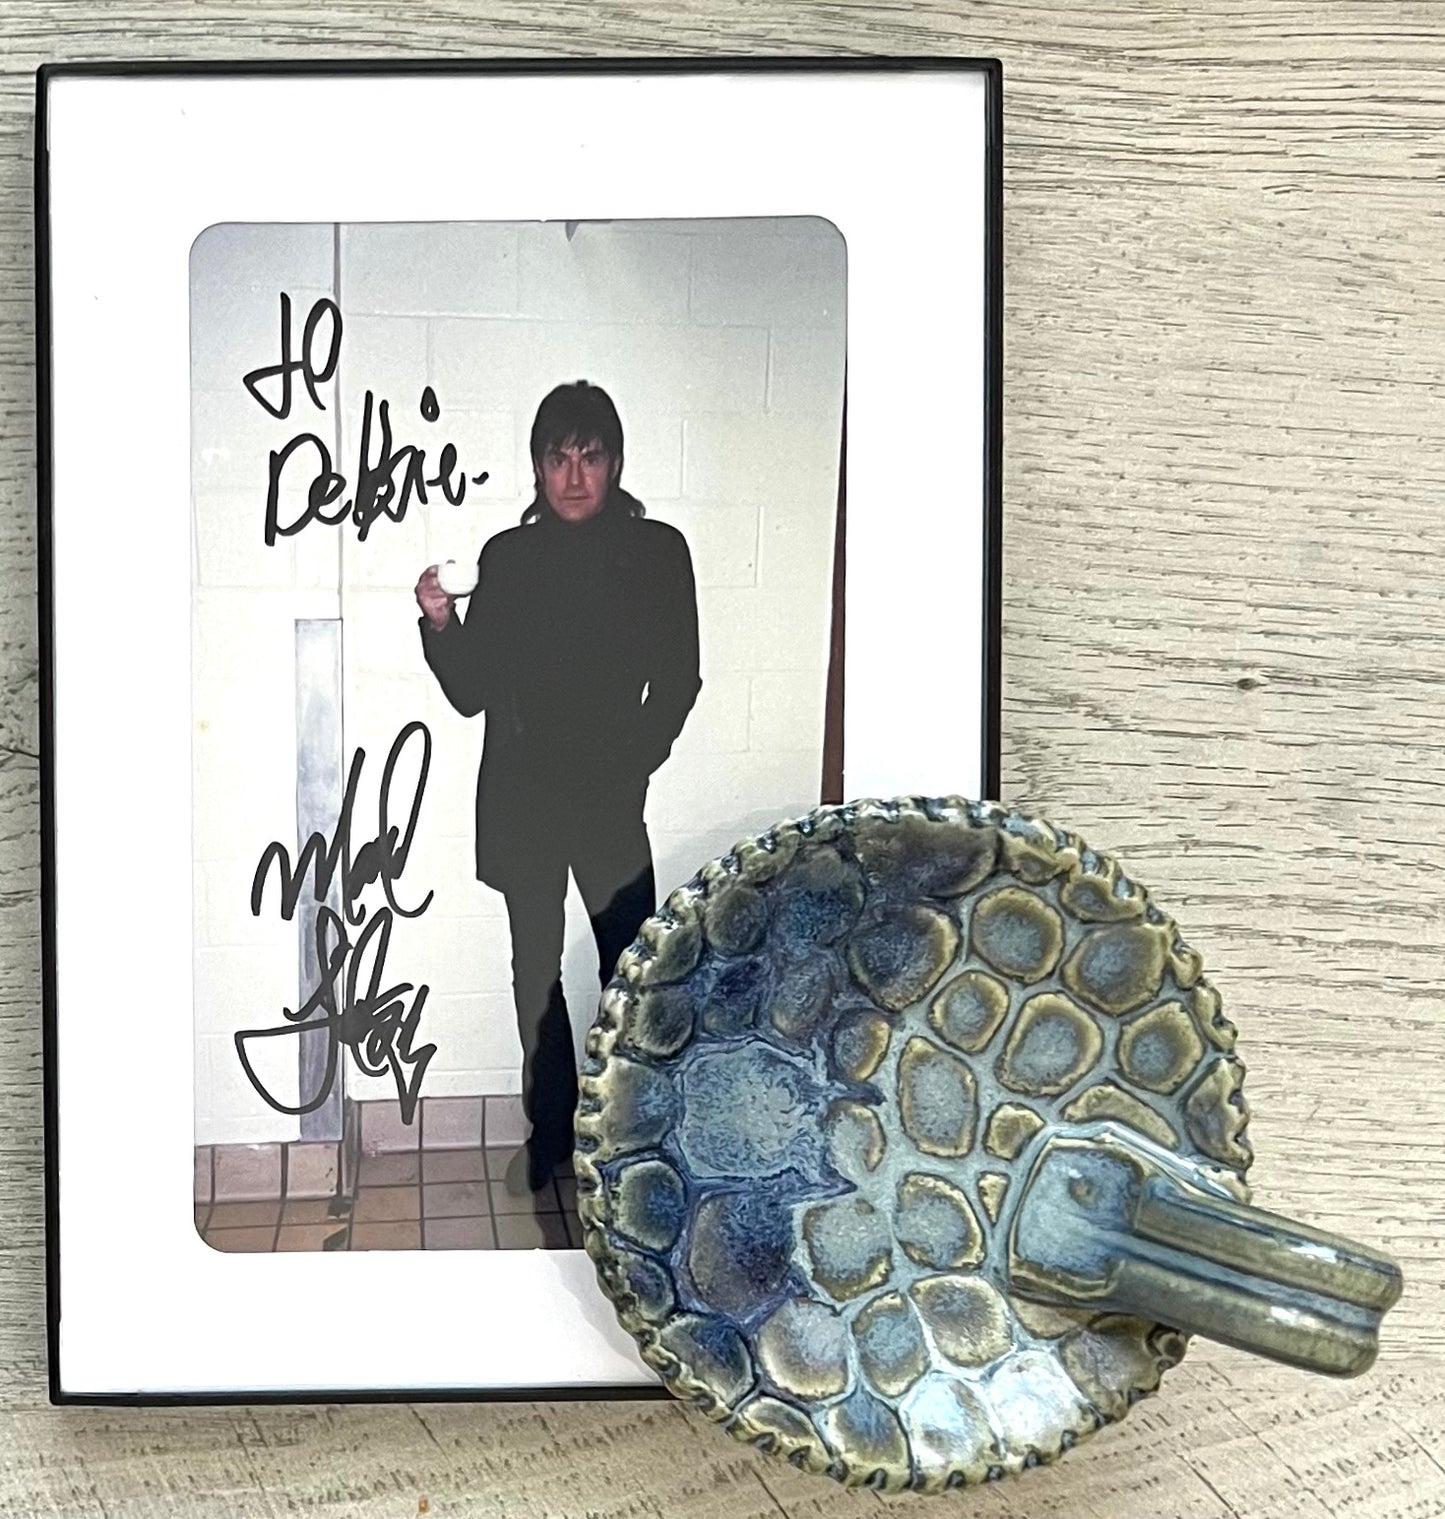 Tea with Mark Lindsay 8 - Teabag Holder/Spoon Rest and Framed Photo - Personally Autographed to YOU by Mark